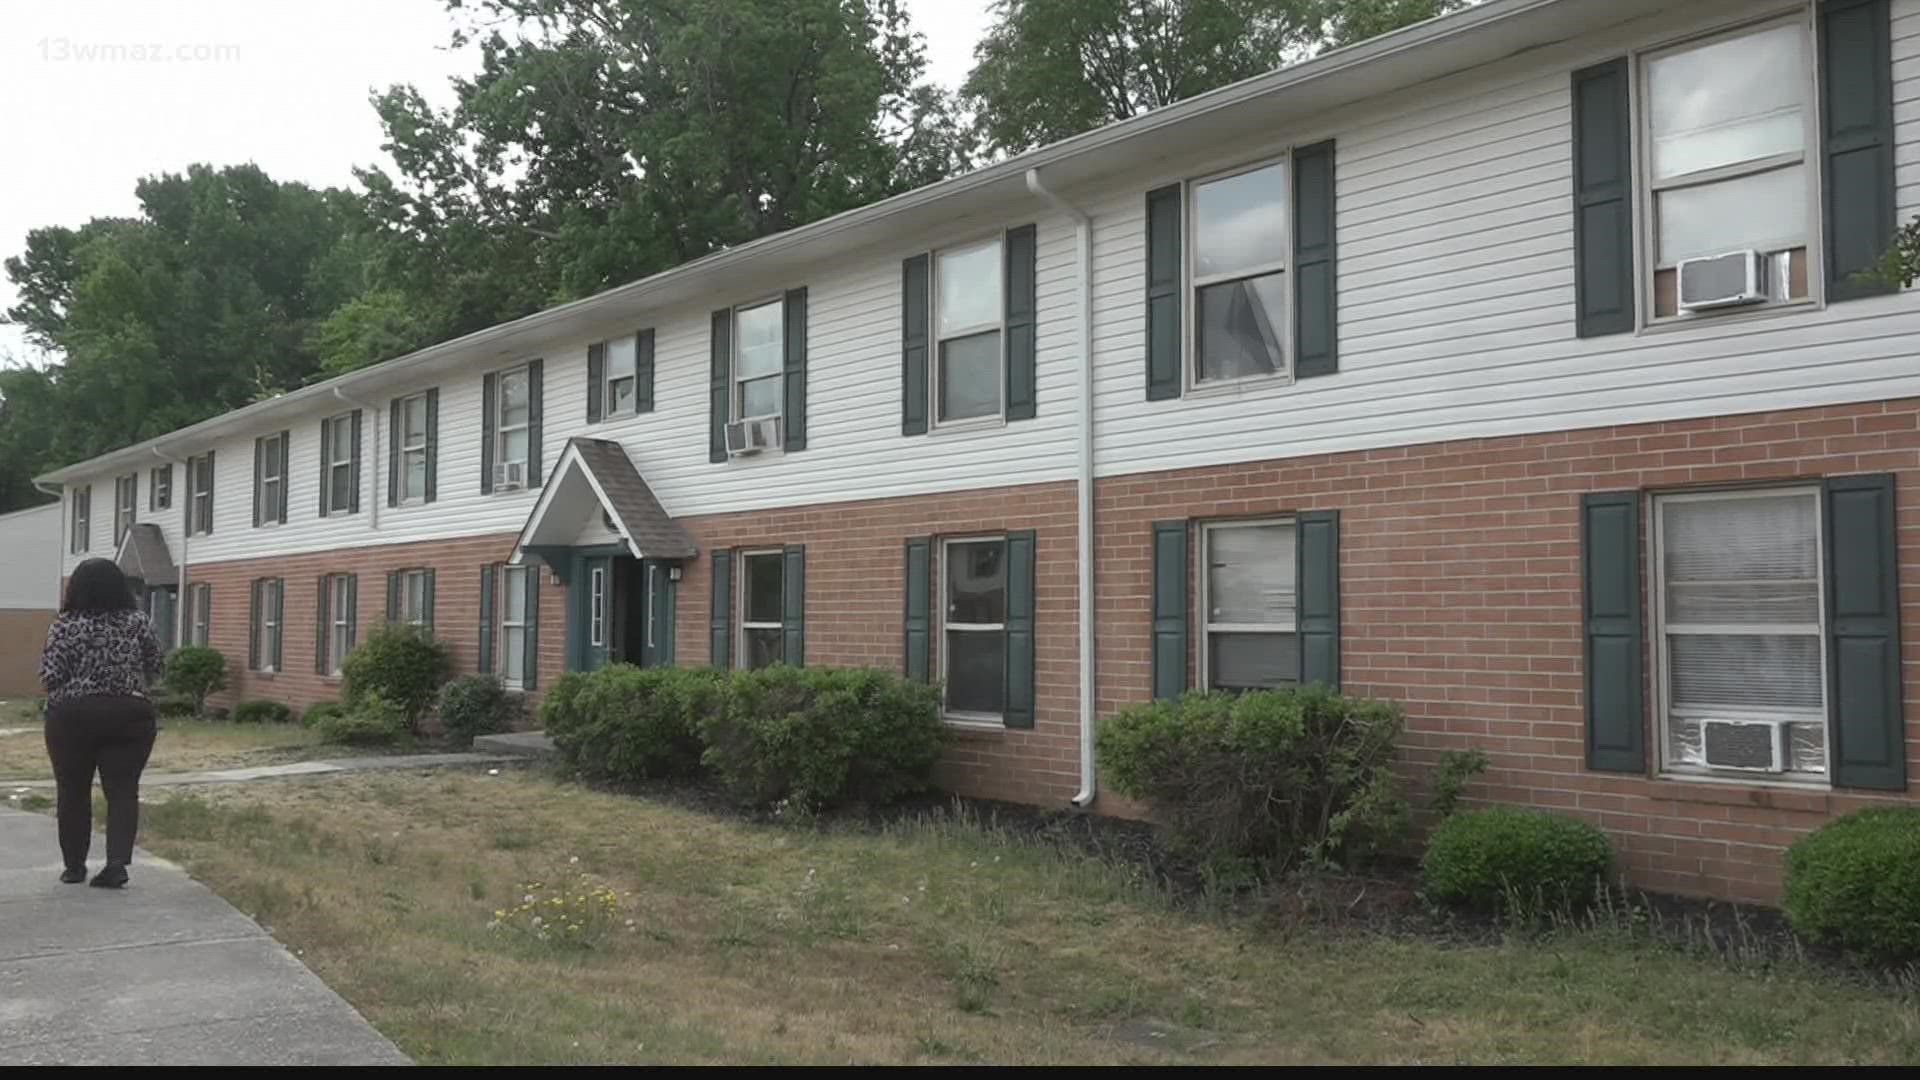 Residents at Blossom Hill Estates are upset with managers that their units are unlivable